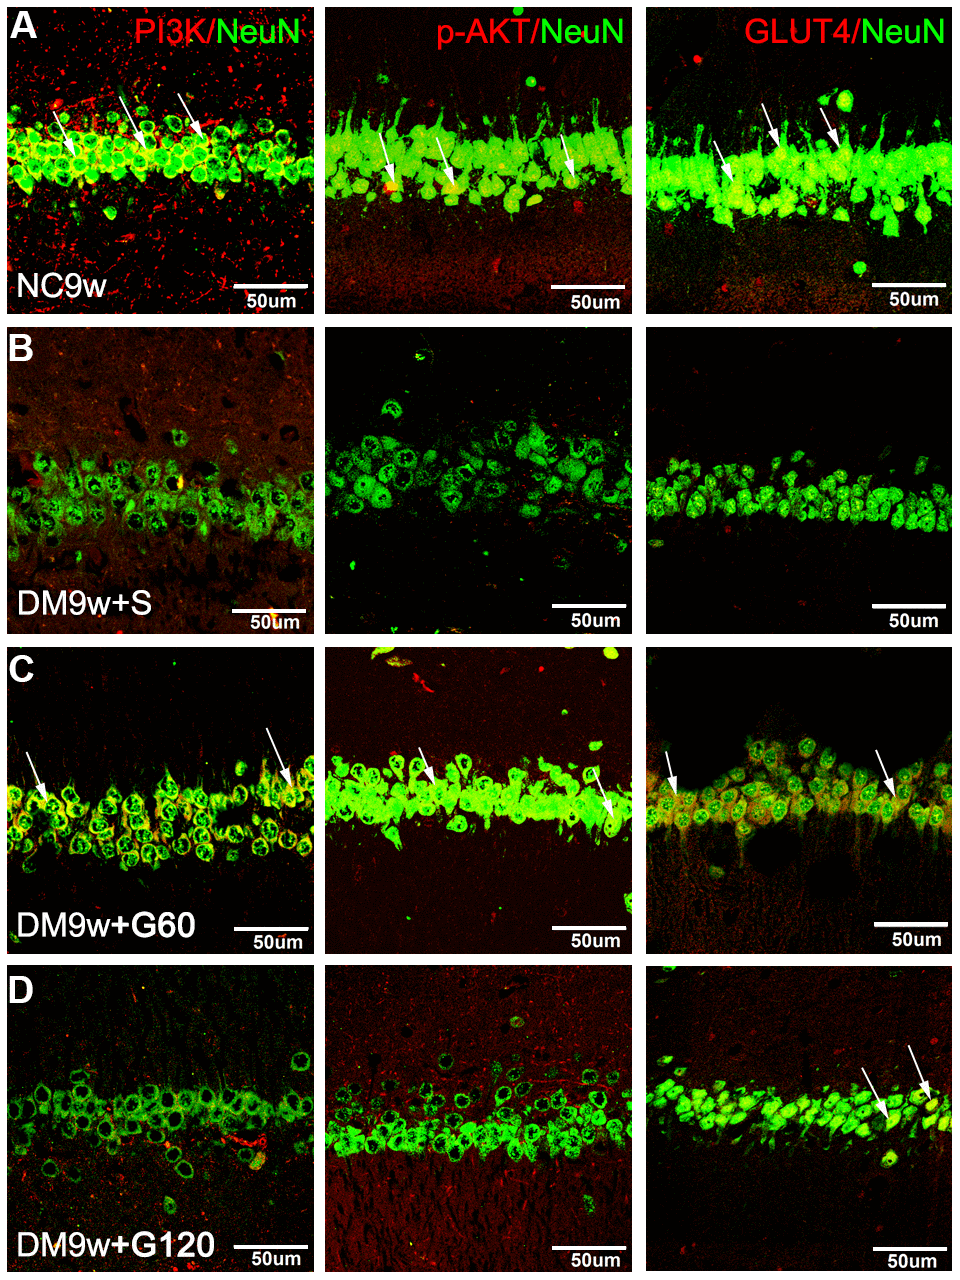 Gastrodin intervention restored the expression of PI3K/AKT/GLUT4 pathway in the hippocampal neurons of diabetic rats. Double immunofluorescence staining showed PI3K, p-AKT and GLUT4 positive neurons in the hippocampus of NC9w (A) DM9w+S (B) DM9w+G60 (C) and DM9w+G120 (D) groups. Note the diminution of these factors’ immunofluorescence in the neurons of the DM9w+S group as compared with the normal control. However, the immunofluorescence was restored to a level comparable to that of the normal in the DM9w+G60 group. White arrows indicated double positive cells. Bar = 50 μm.